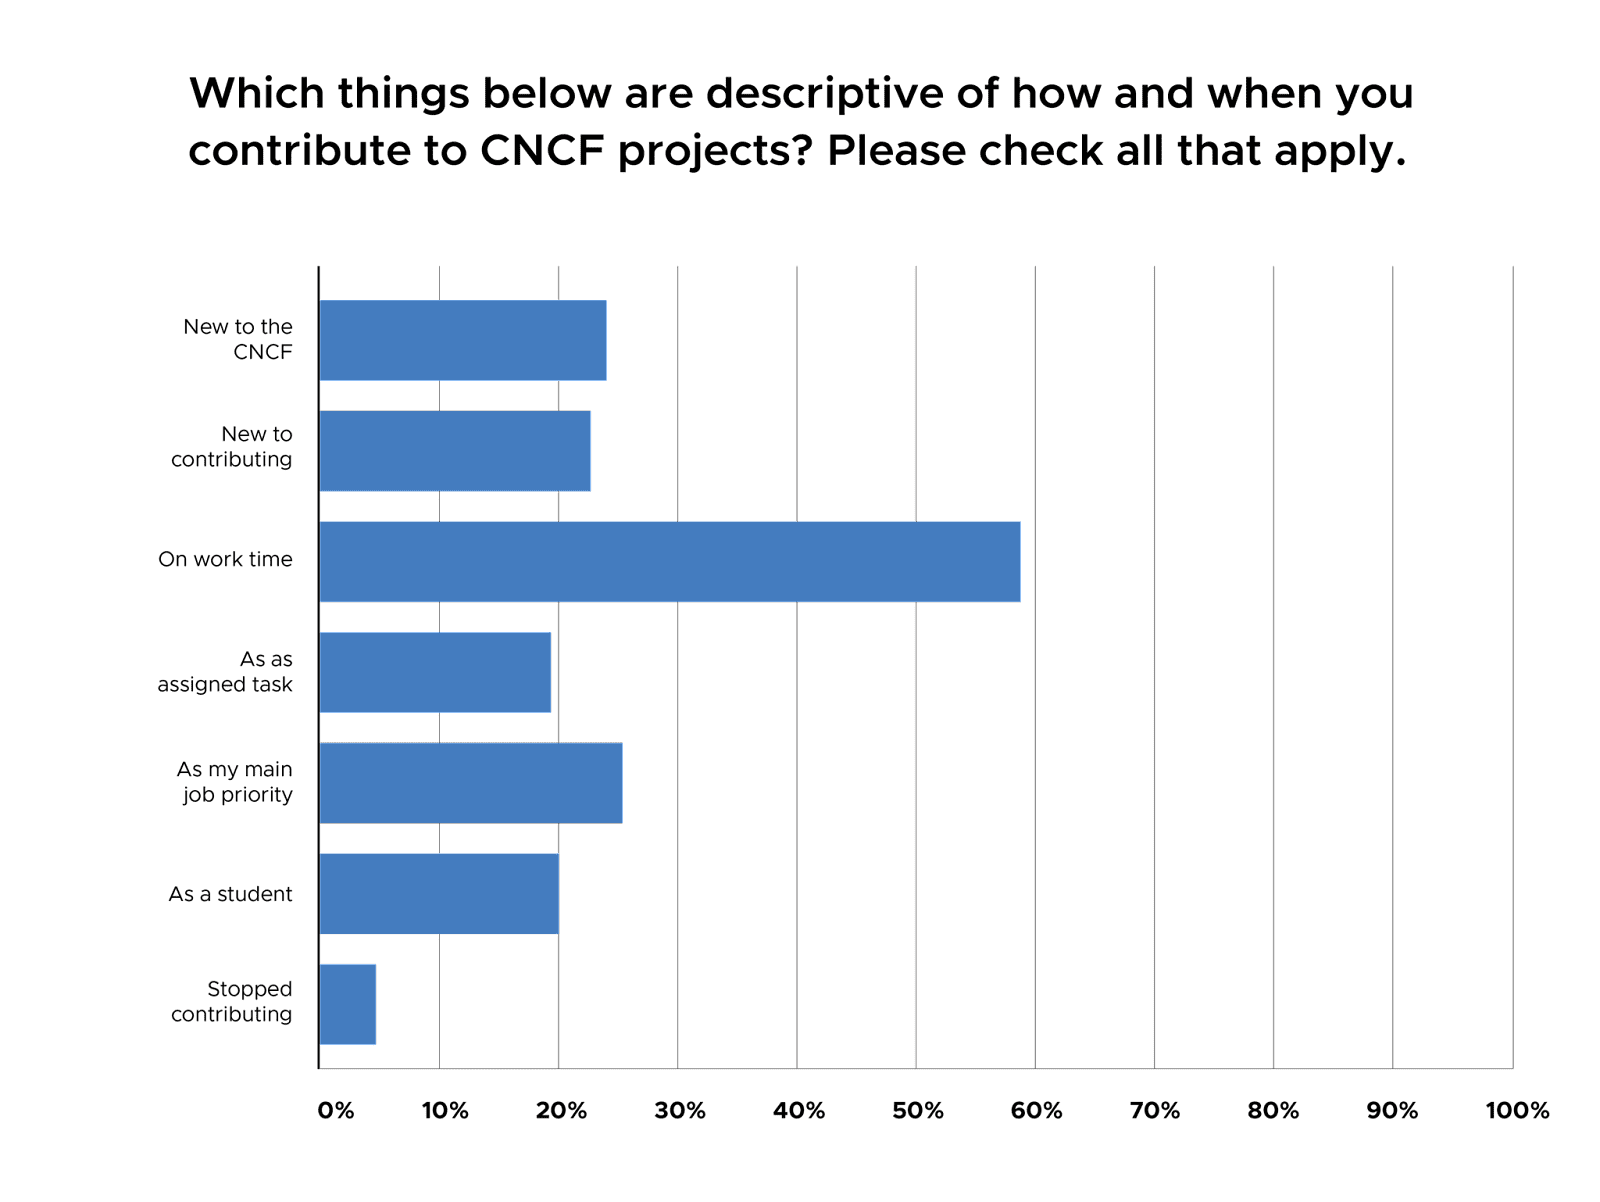 Bar chart showing 59% of the respondents voted they contributed to CNCF projects on work time